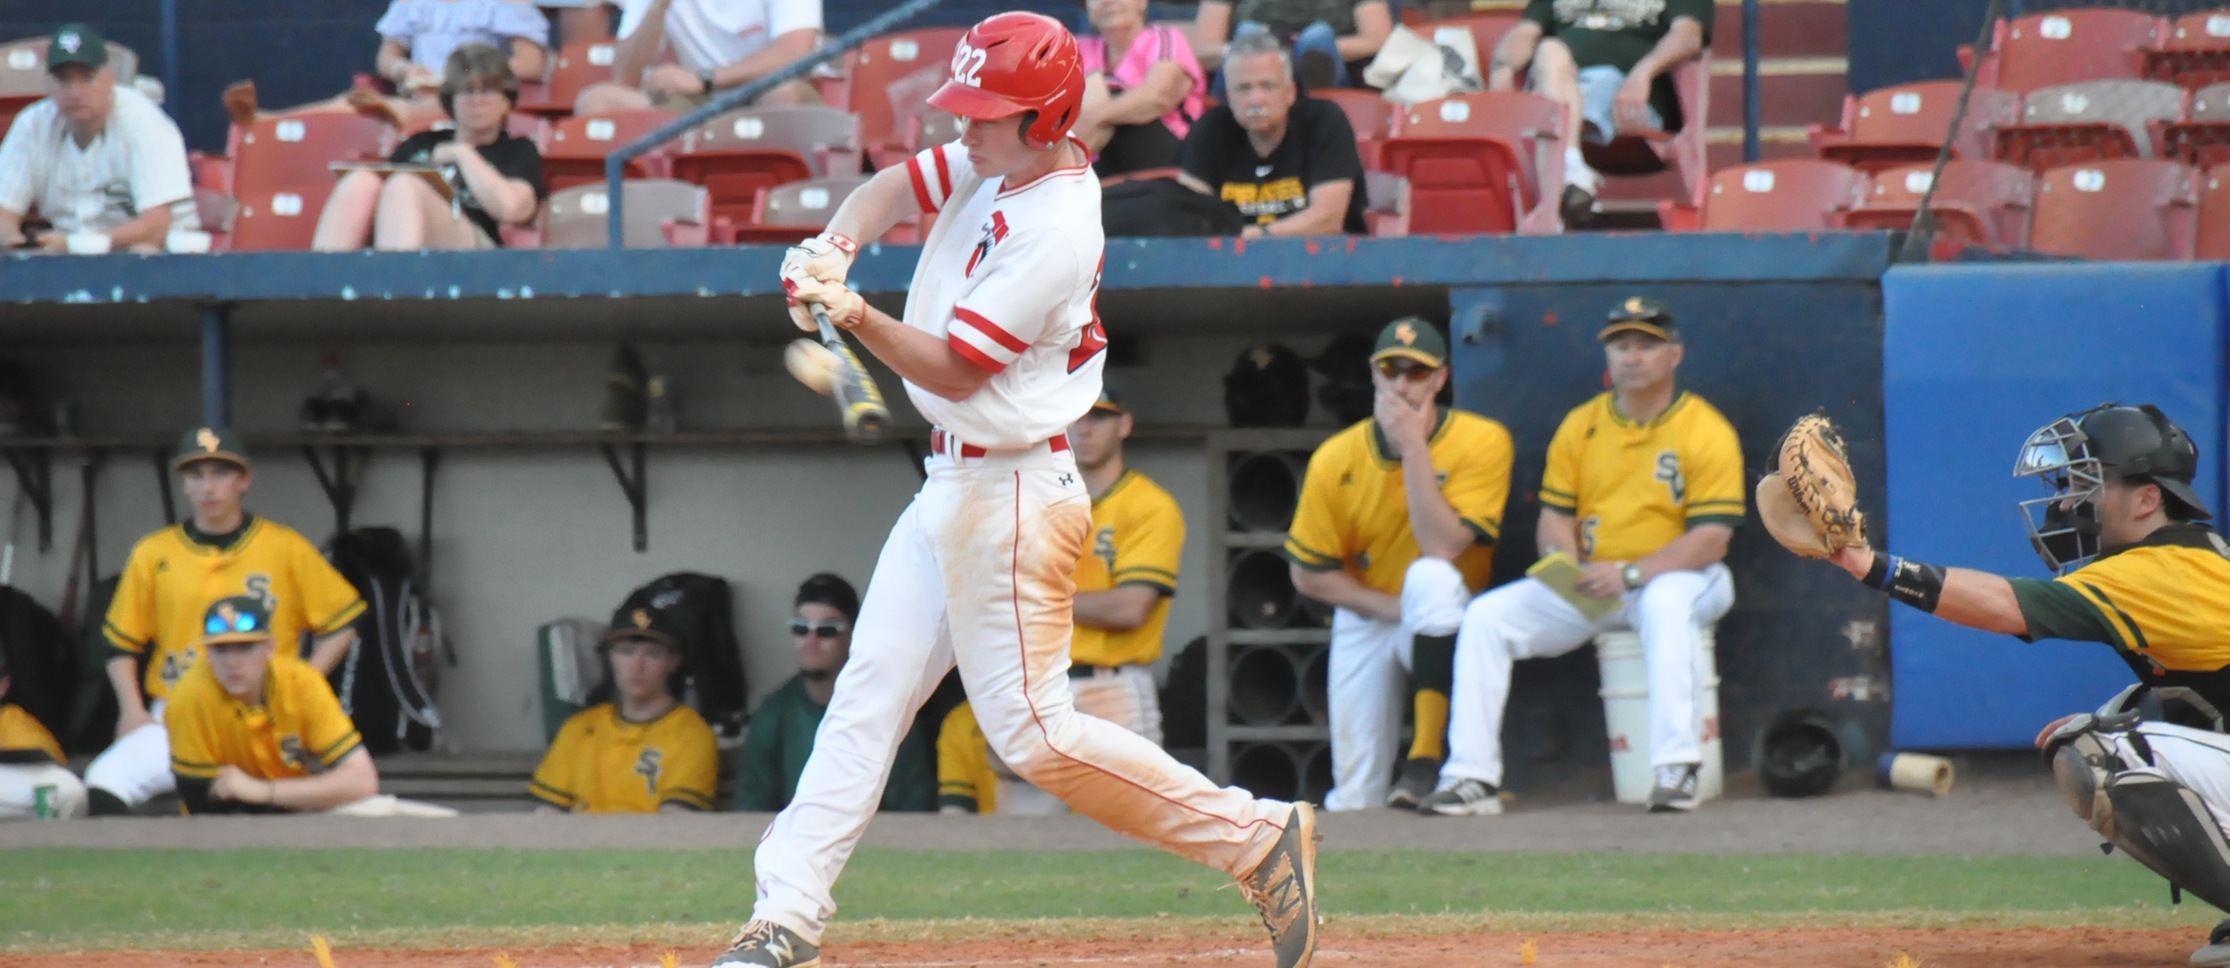 Wittenberg Baseball Upends Wilmington 8-2 in Mid-Week Action